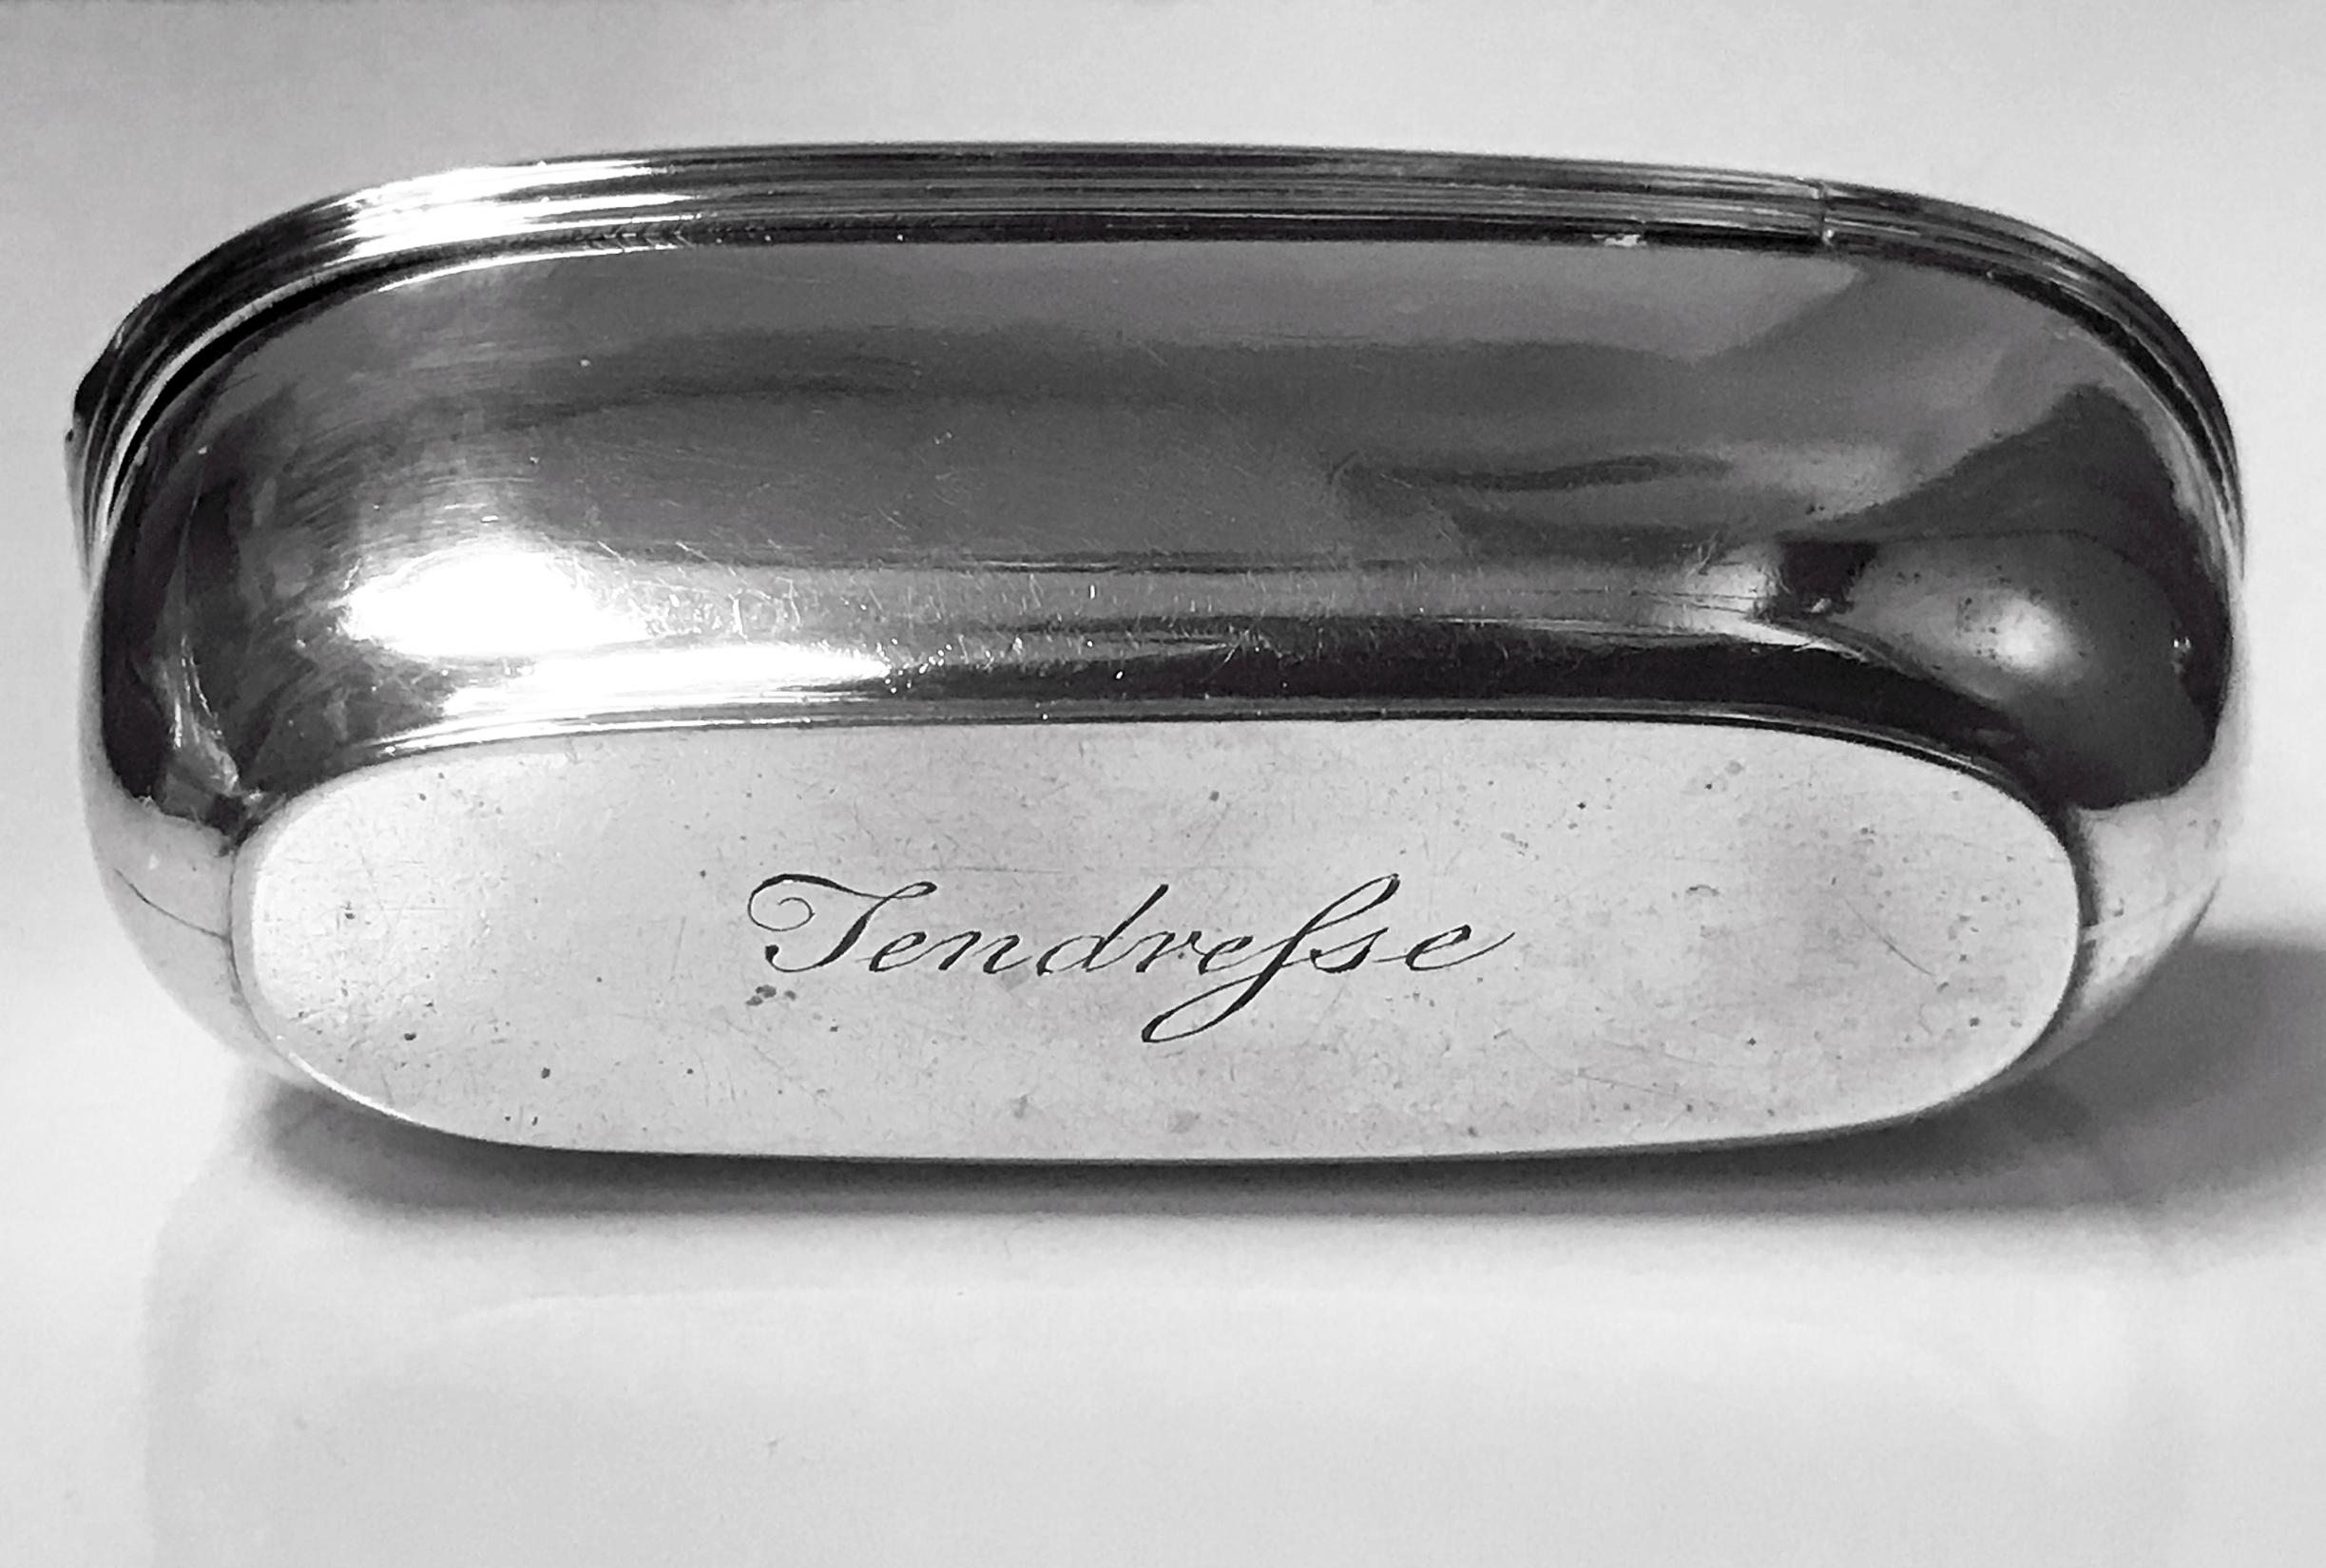 Rare 18th century Georgian Silver Bath Snuff Box, London 1767 William and Aaron Lesturgeon. The hinged snuff box in the form of a bath, plain with reeded border surround and three individual foliate motifs, gilded interior. Engraved on the underside